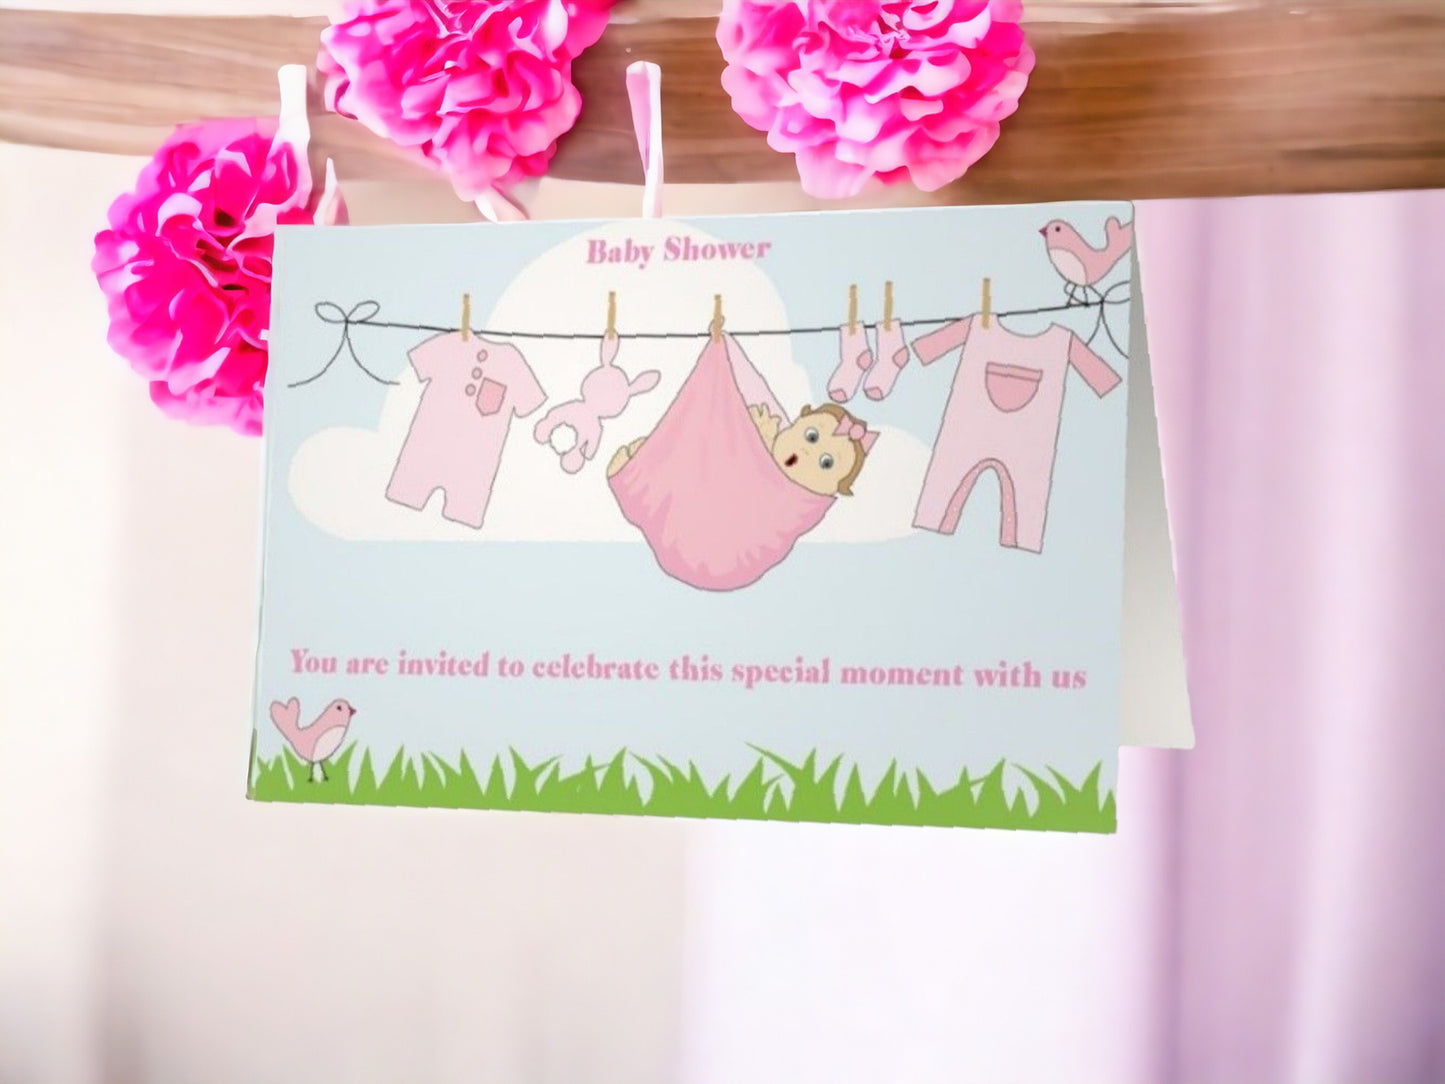 Baby Shower Invitation Cards It's A Girl #03